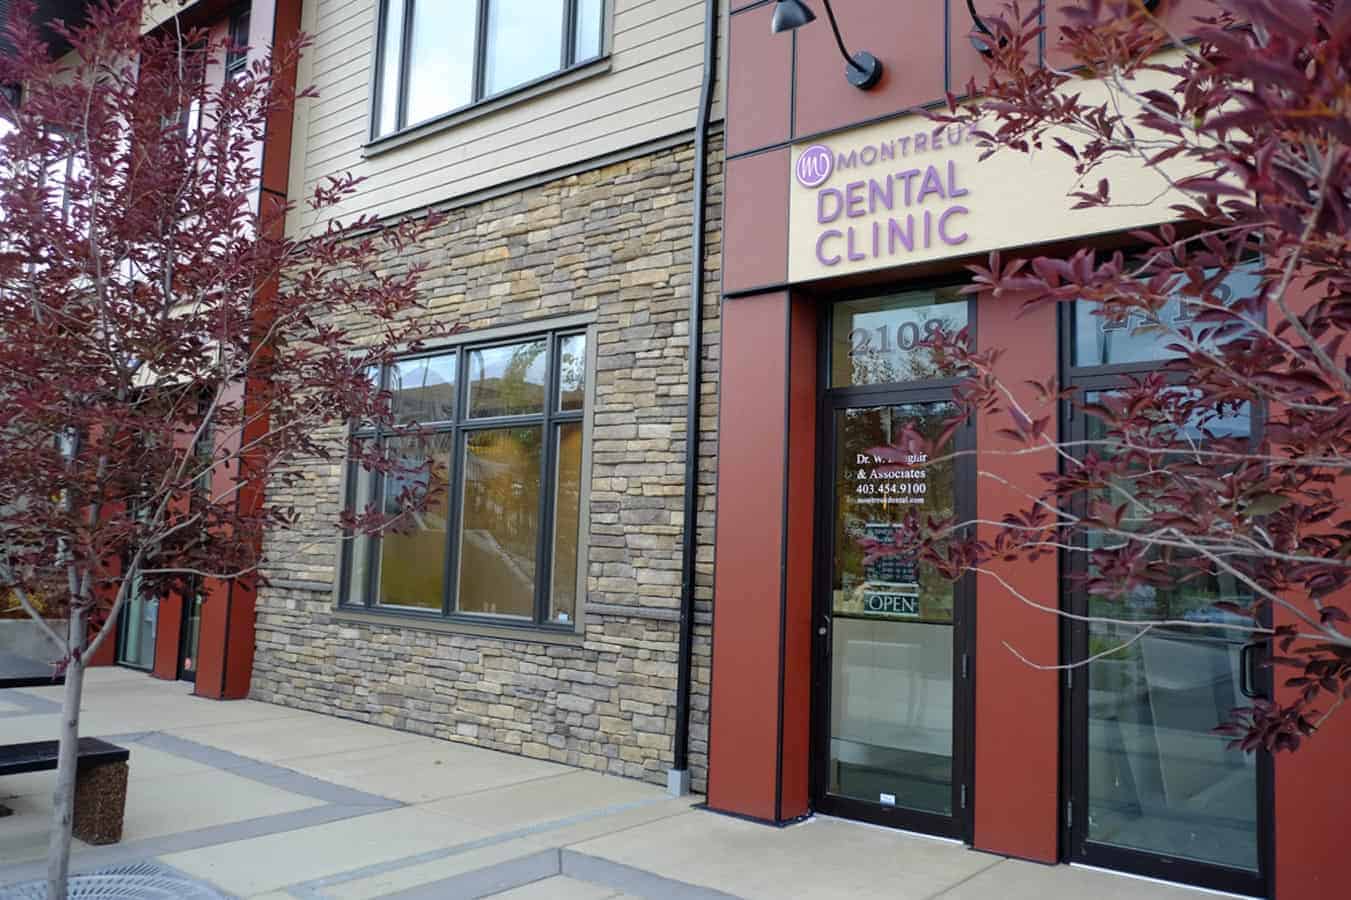 Montreux Dental Clinic Outside View